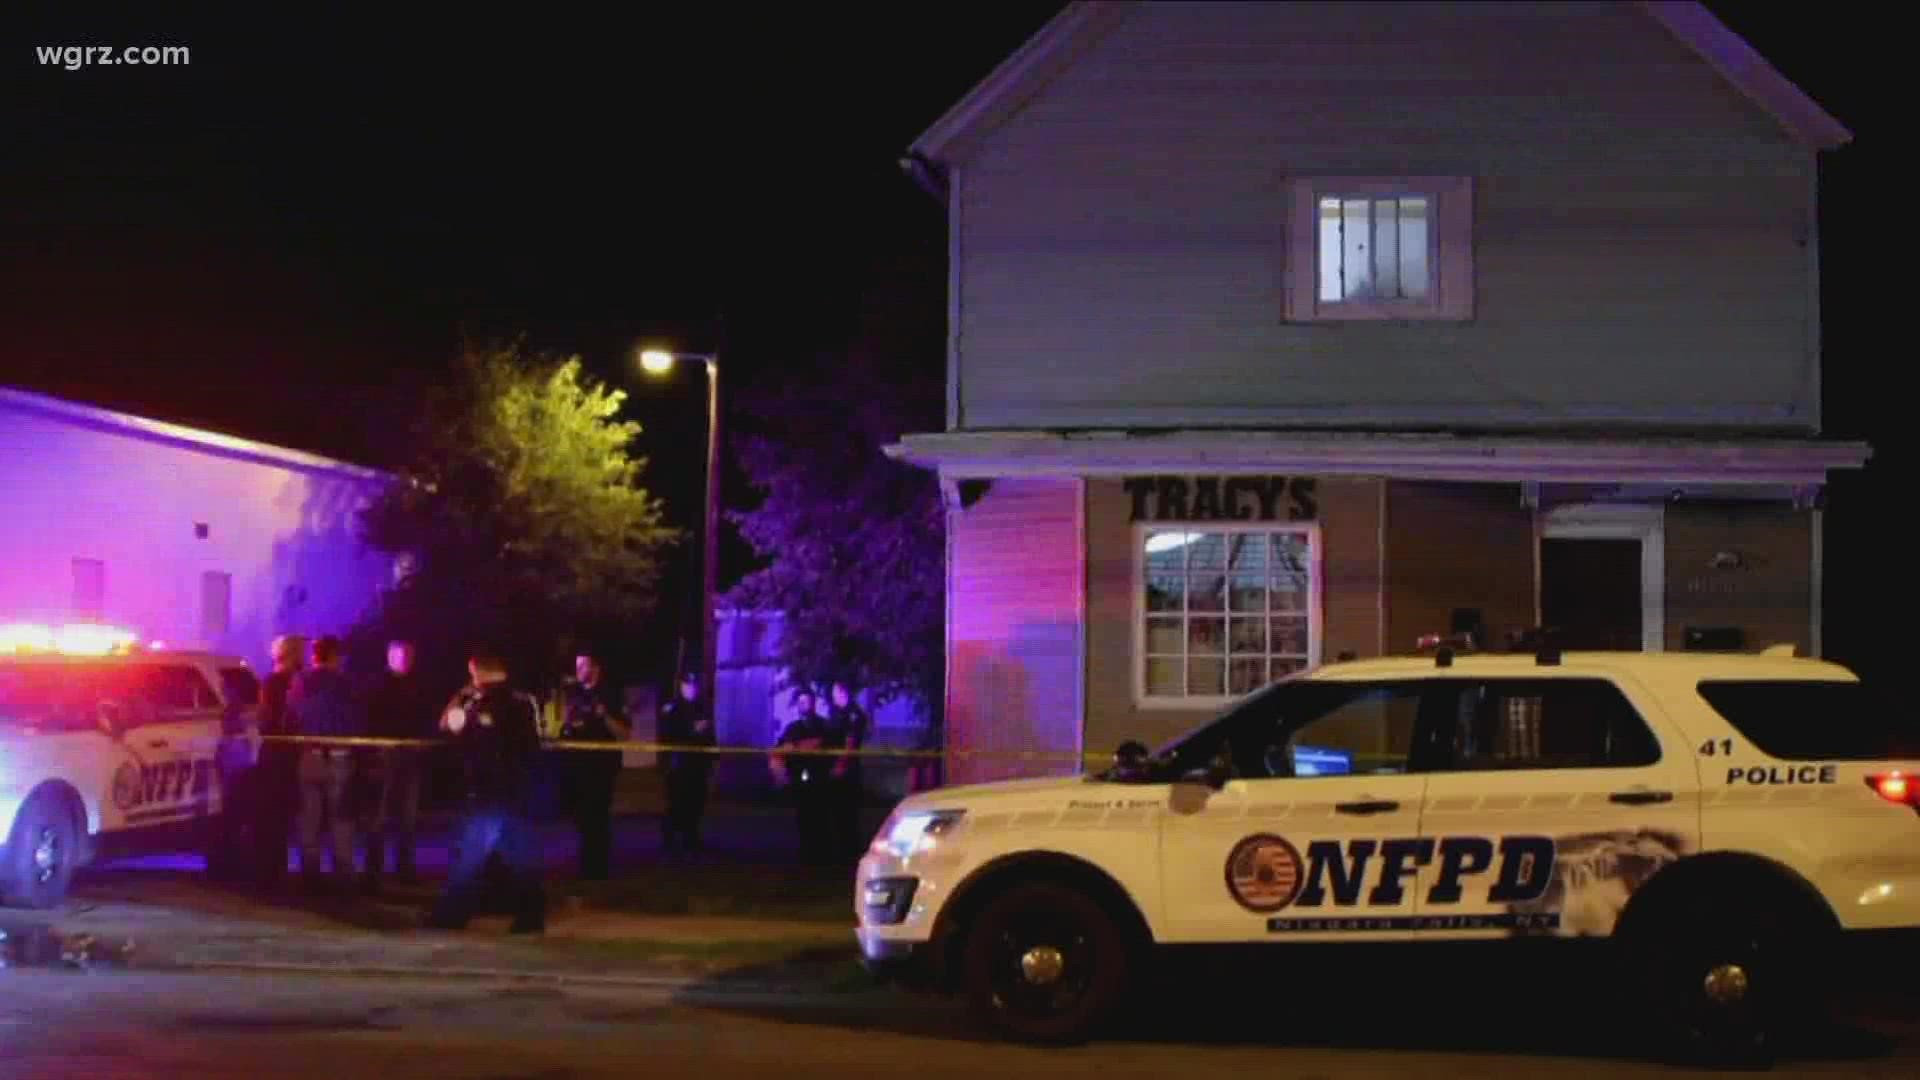 A 58-year-old man was shot multiple times; he was pronounced dead at the scene.